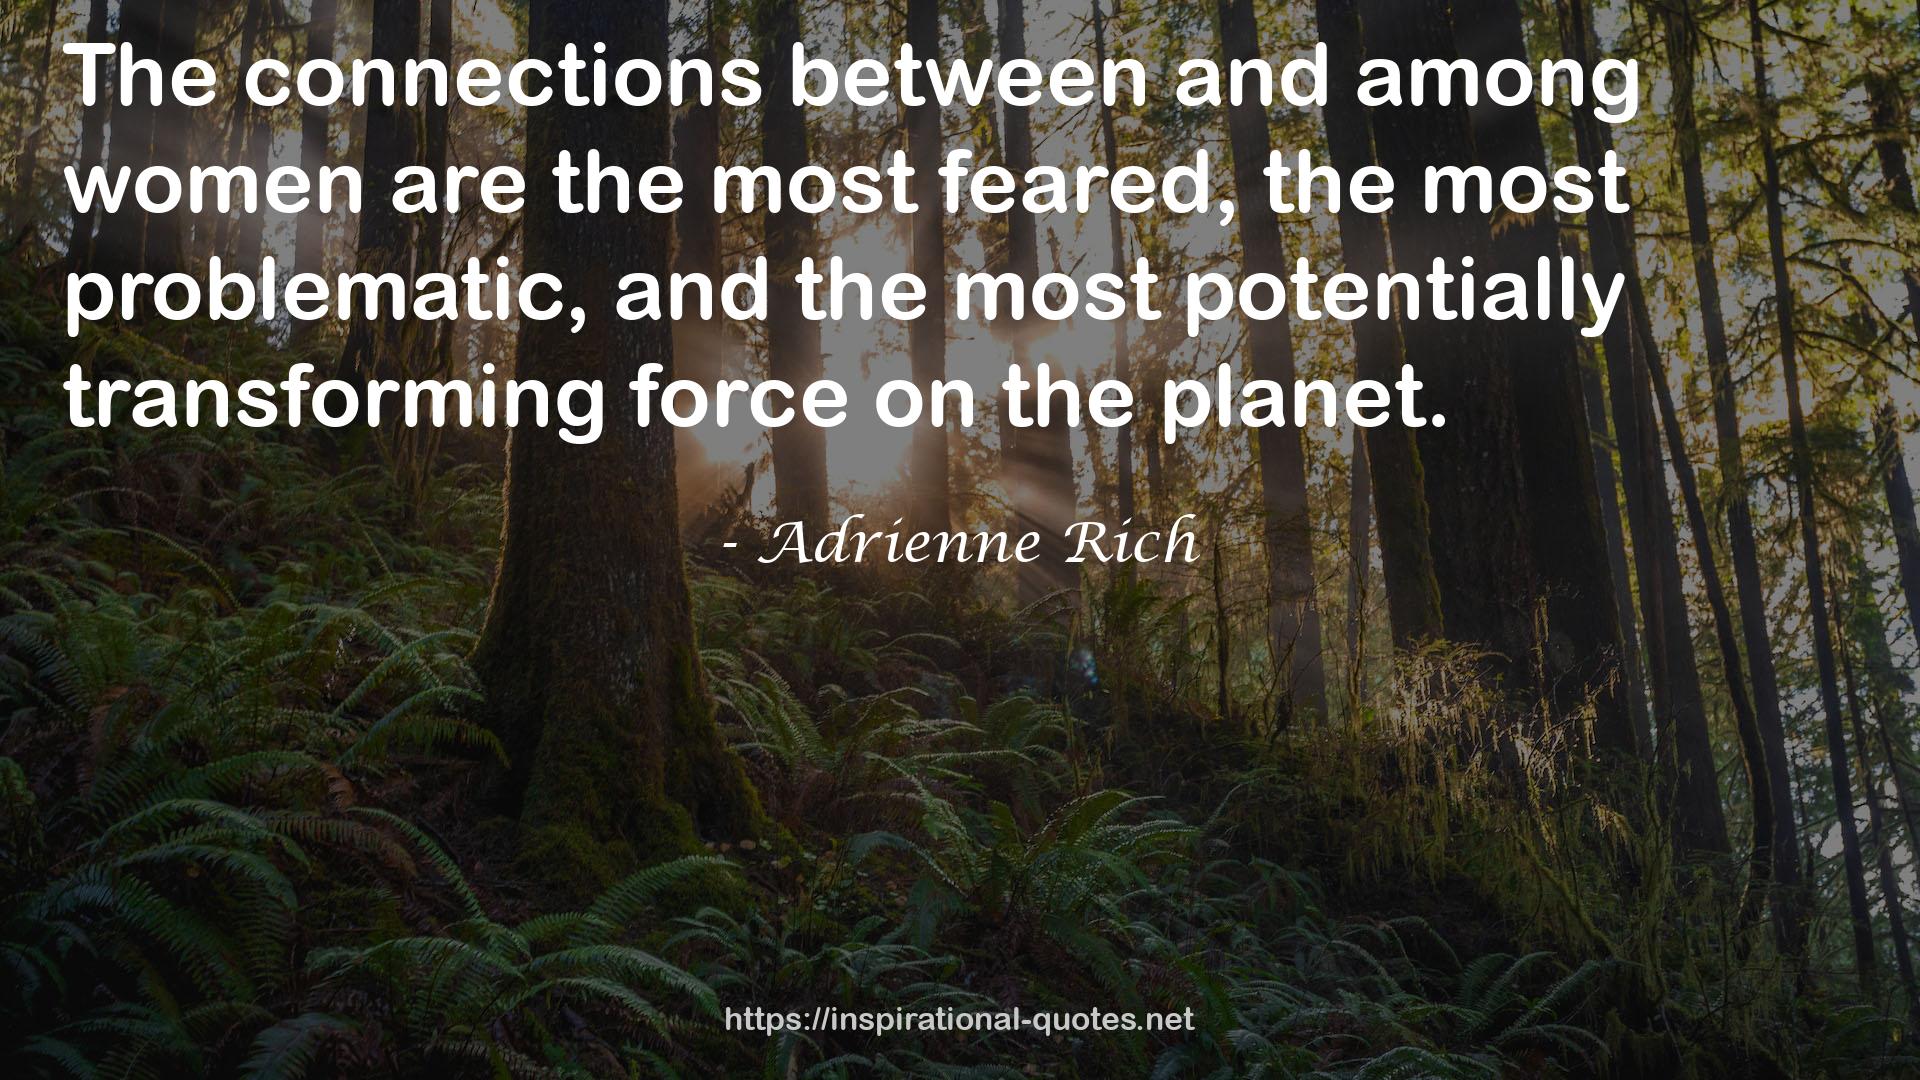 Adrienne Rich QUOTES